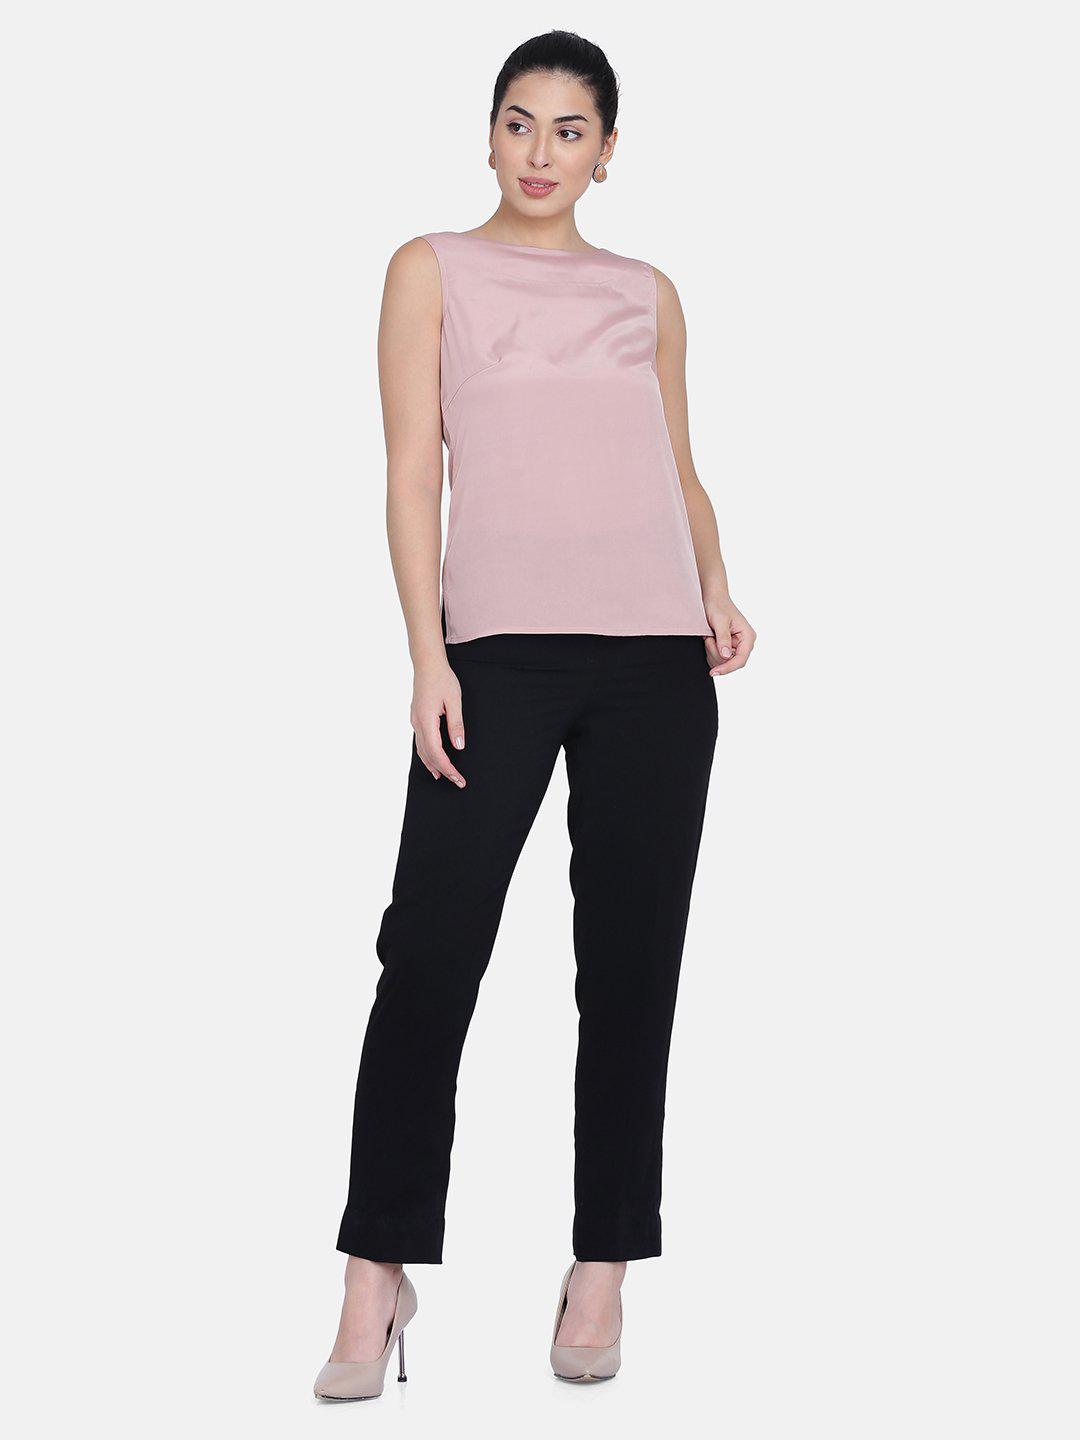 French Crepe Top For Women - Blush Pink